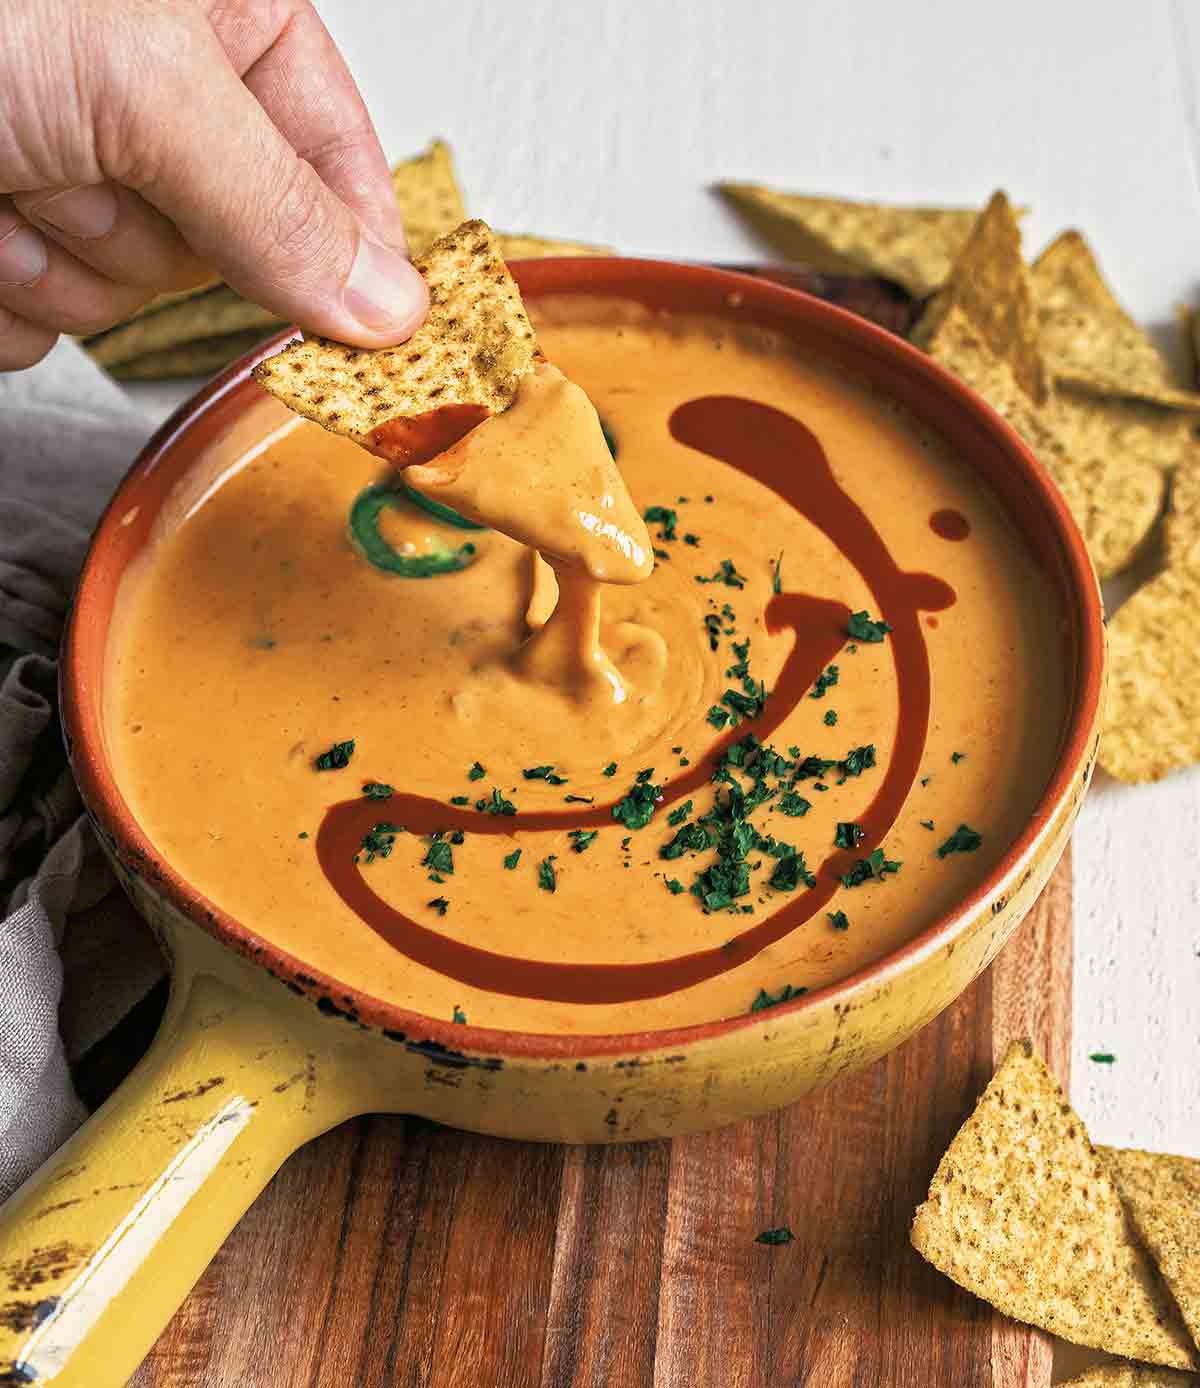 A person scooping cheese dip from a dish.